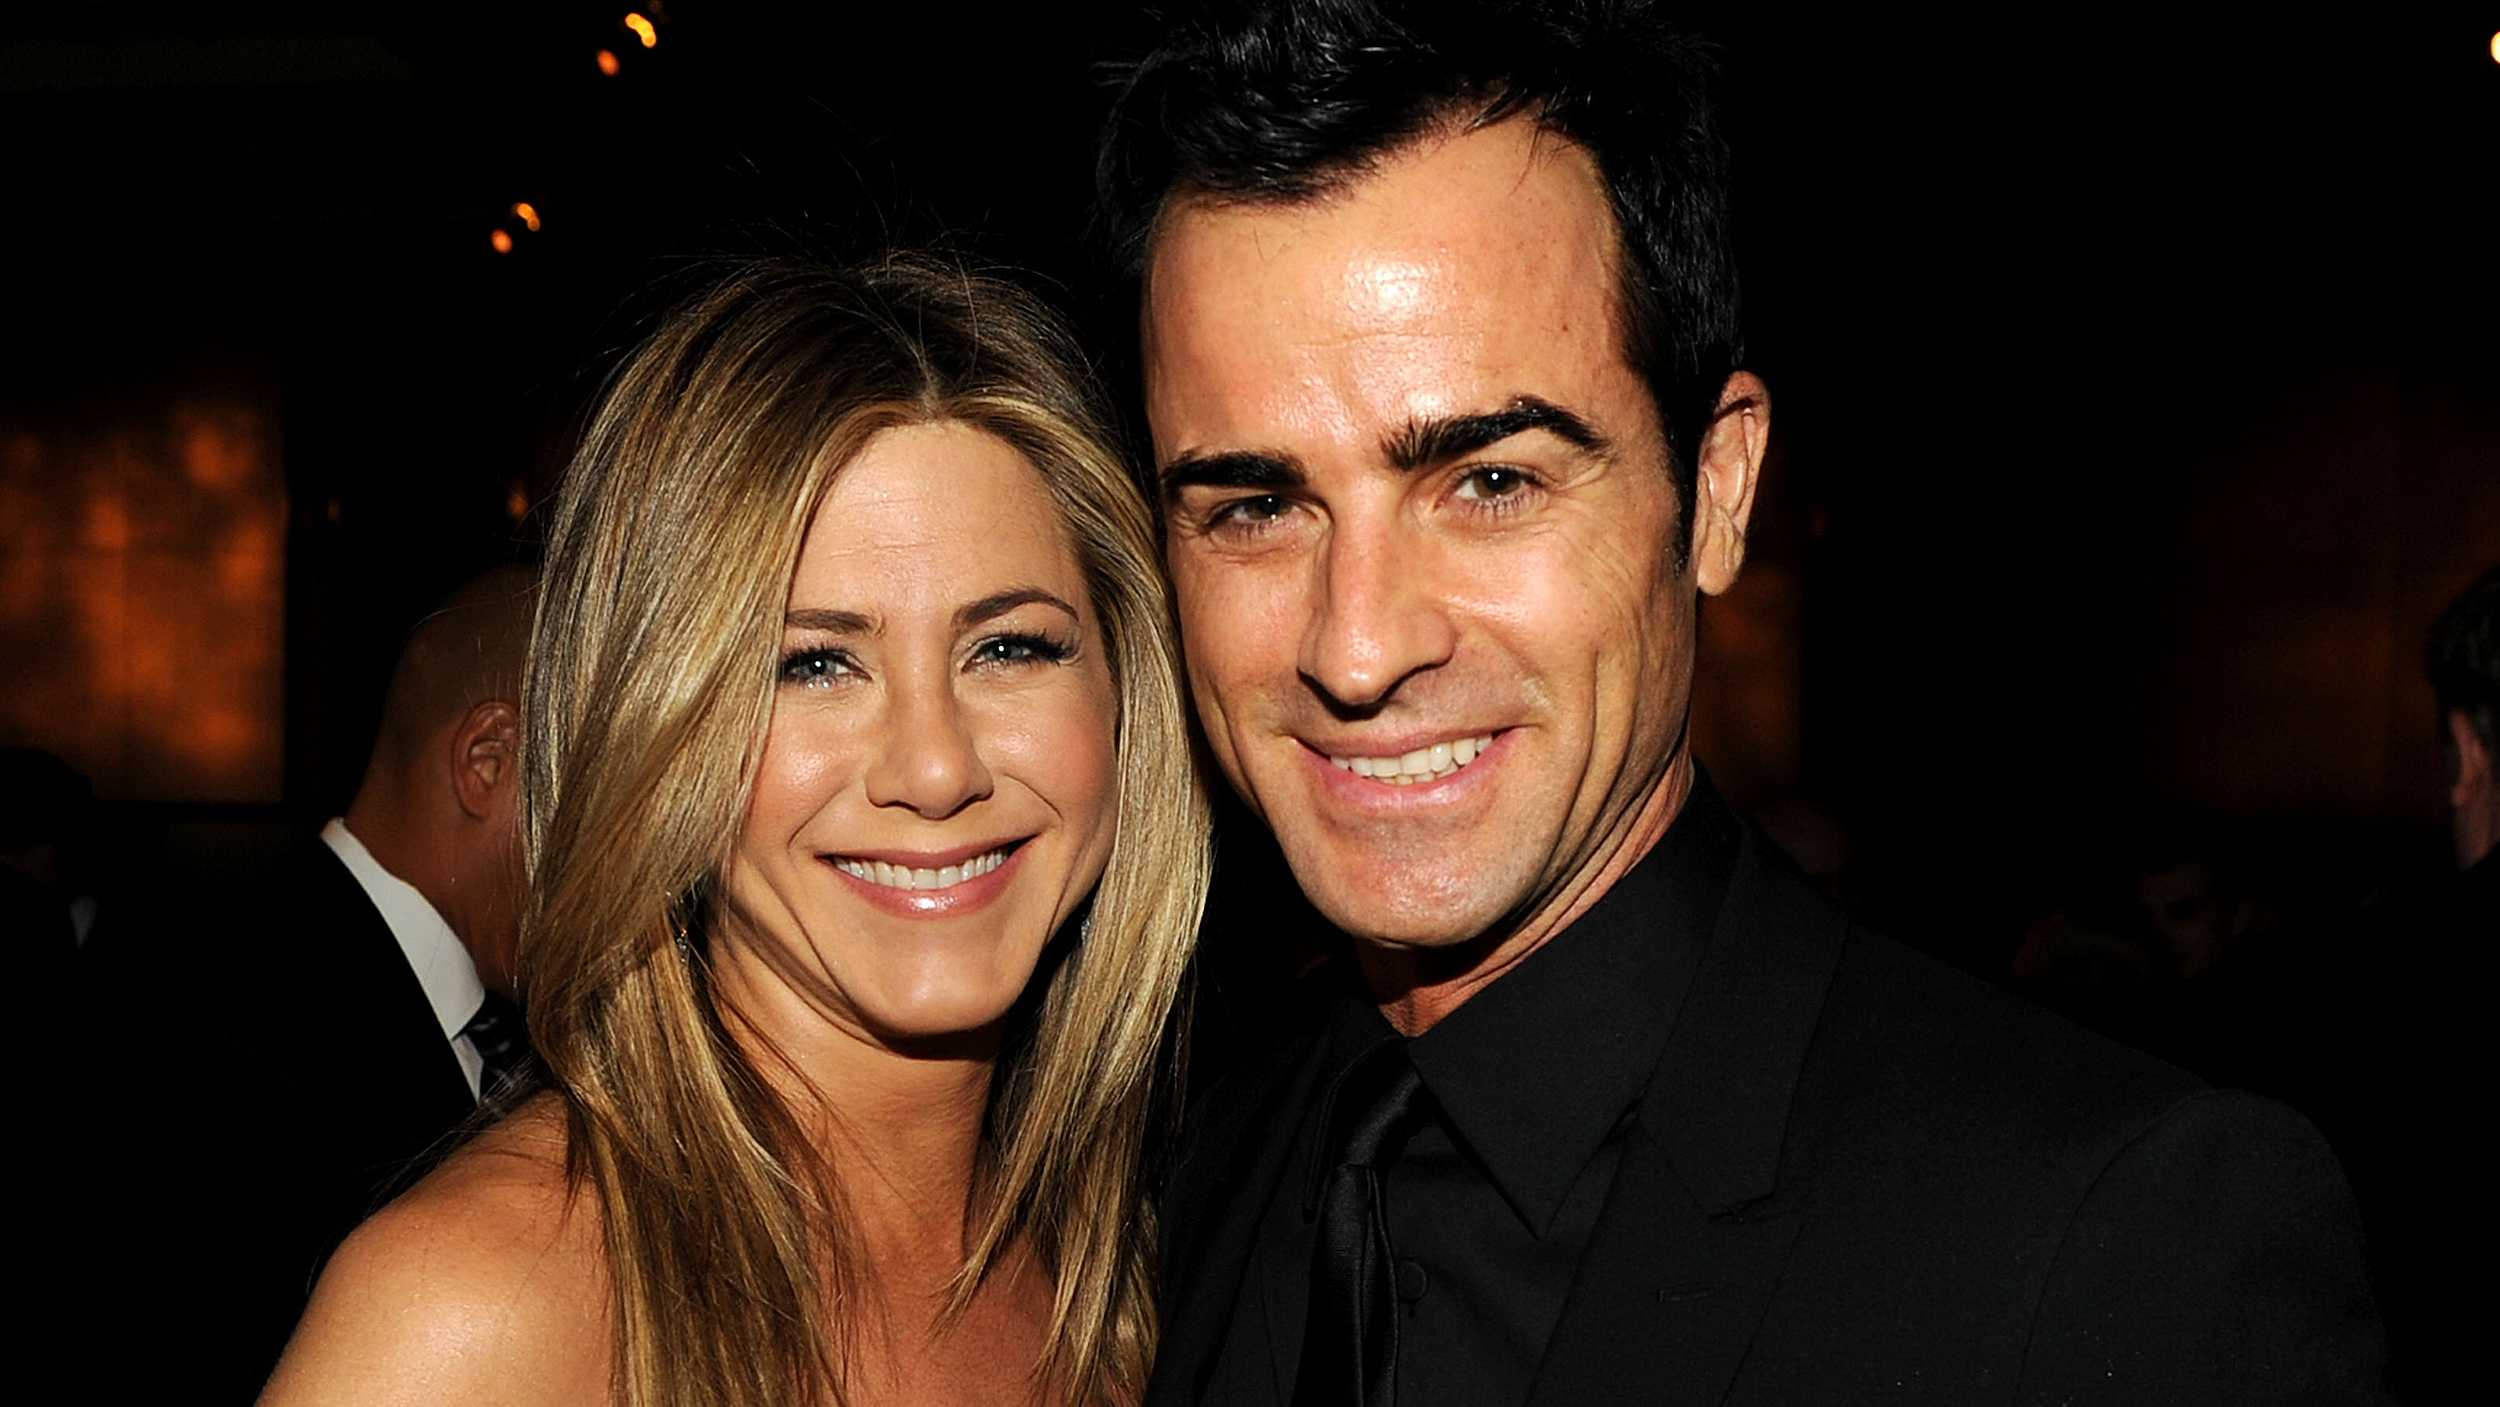 Jennifer Anniston and Justin Theroux (Source: The Today Show)